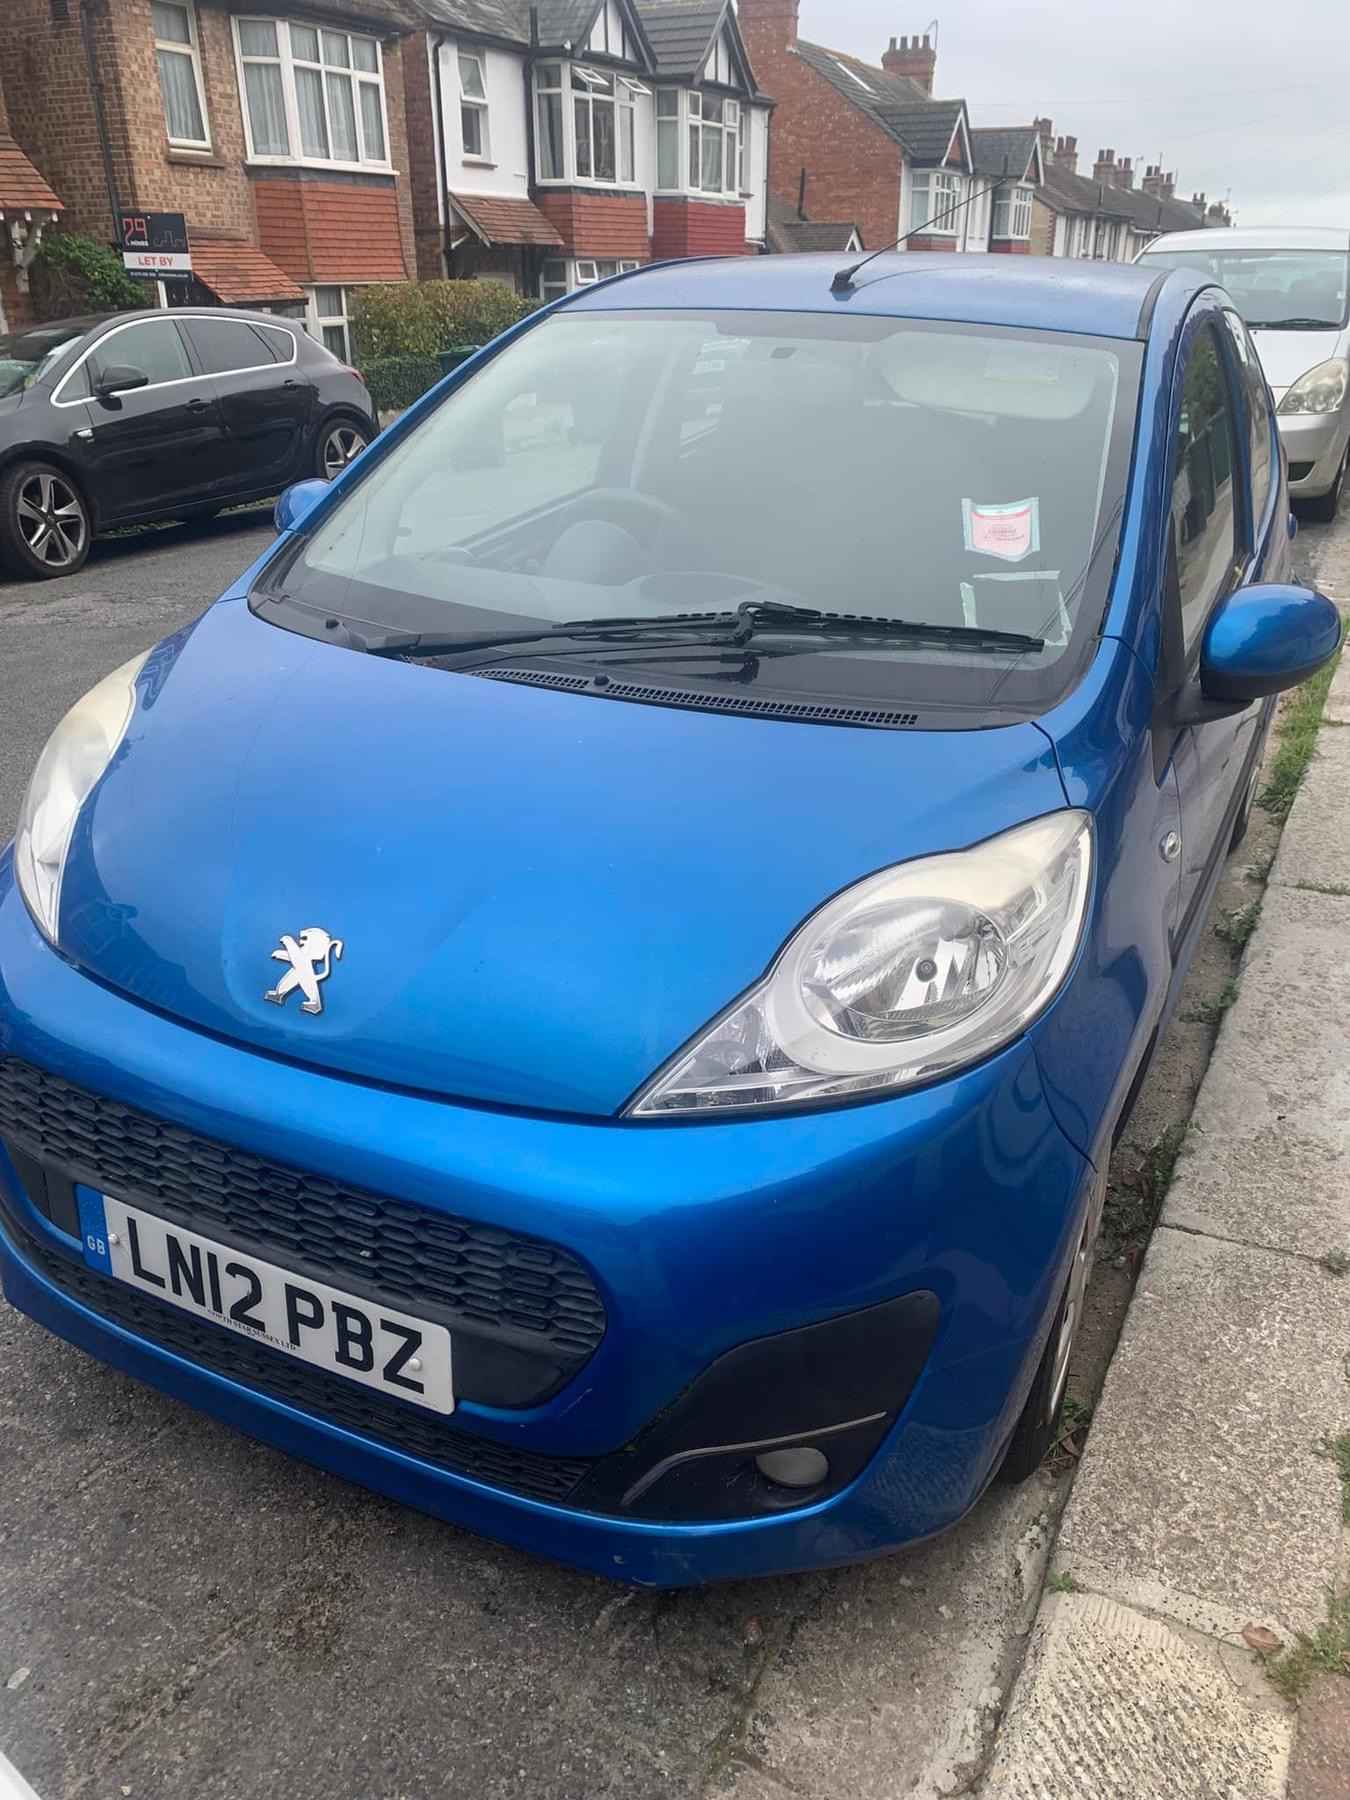 Photograph of LN12 PBZ - a Blue Peugeot 107 parked in Hollingdean by a non-resident. The fifth of six photographs supplied by the residents of Hollingdean.